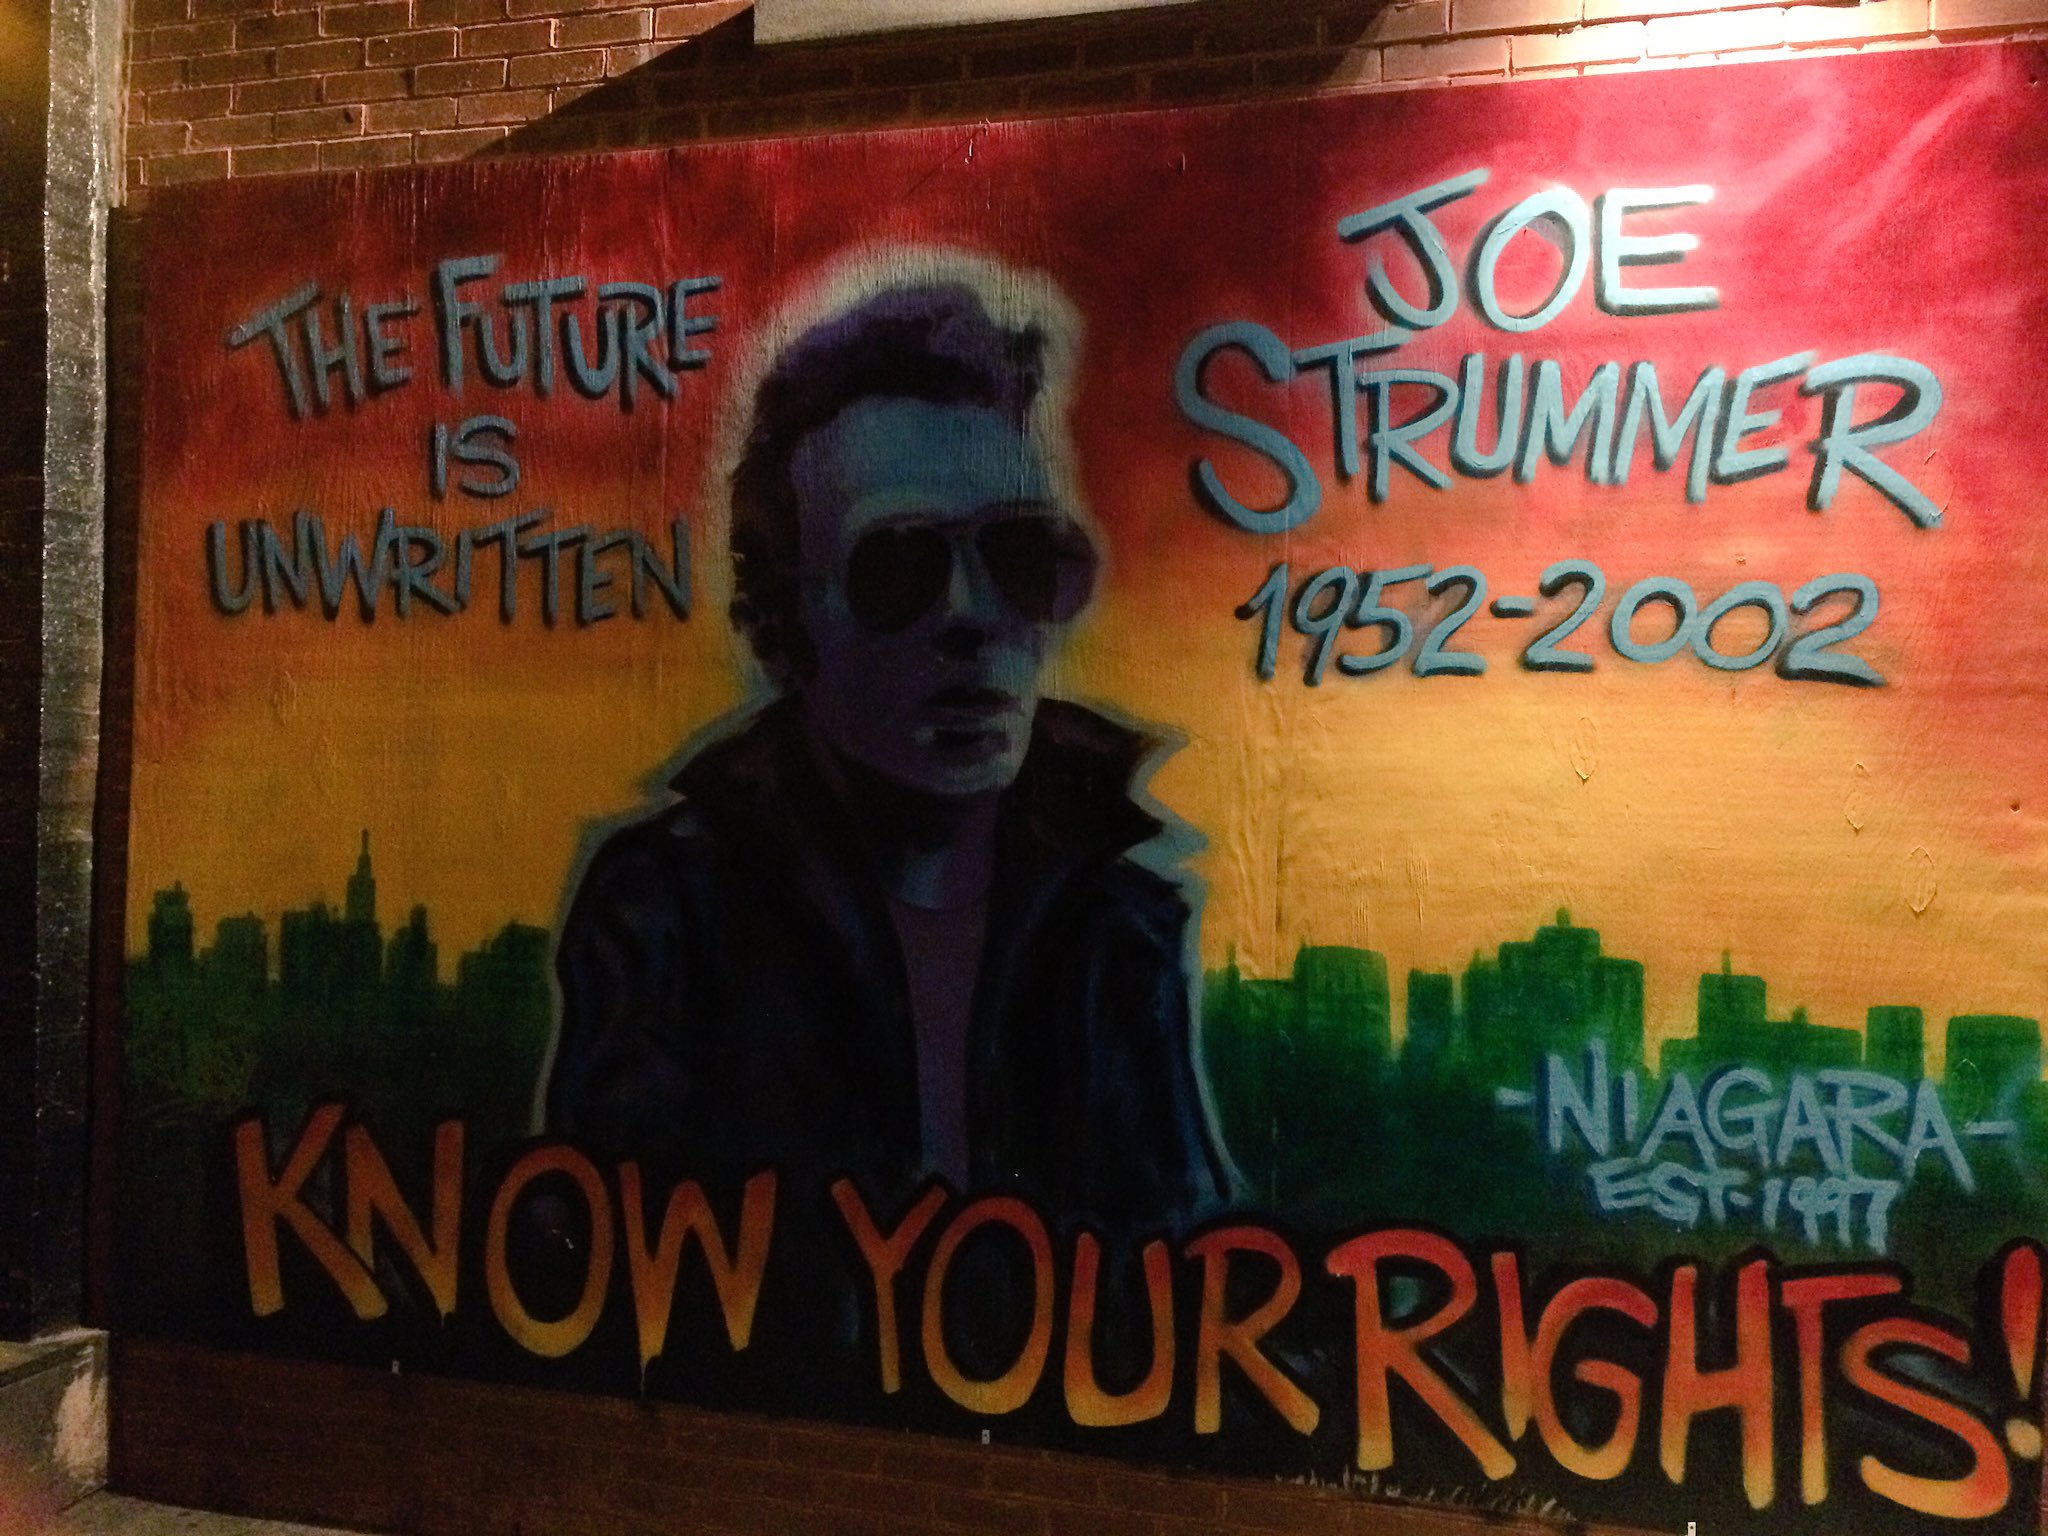 Happy Birthday to the great Joe Strummer. You\re missed every day.
Know Your Rights! 